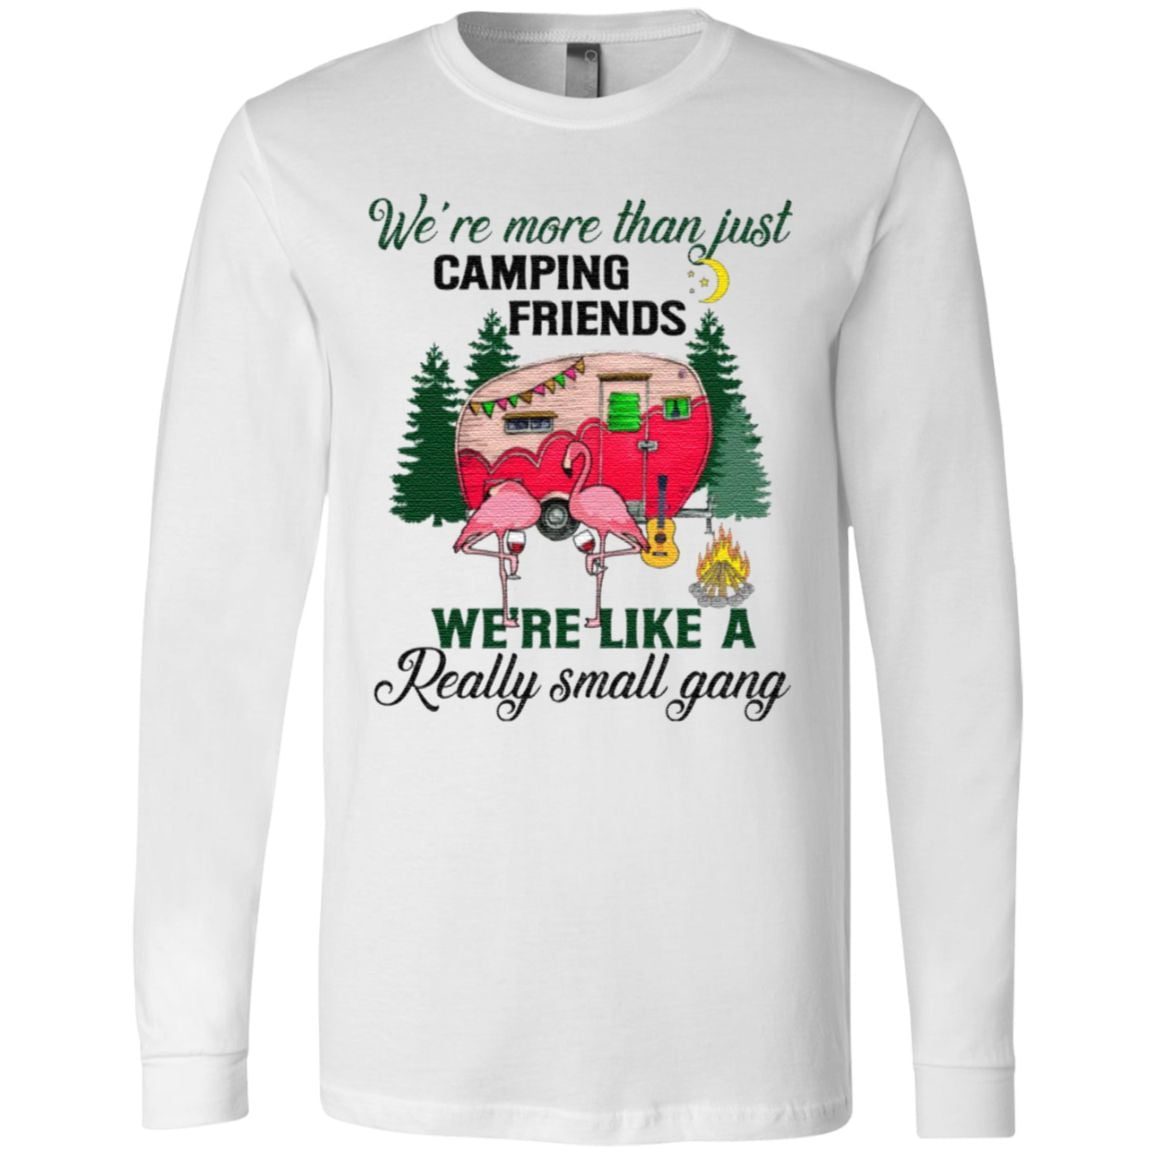 We Are More Than Just Camping Friends We’re Like A Really Small Gang T-Shirt